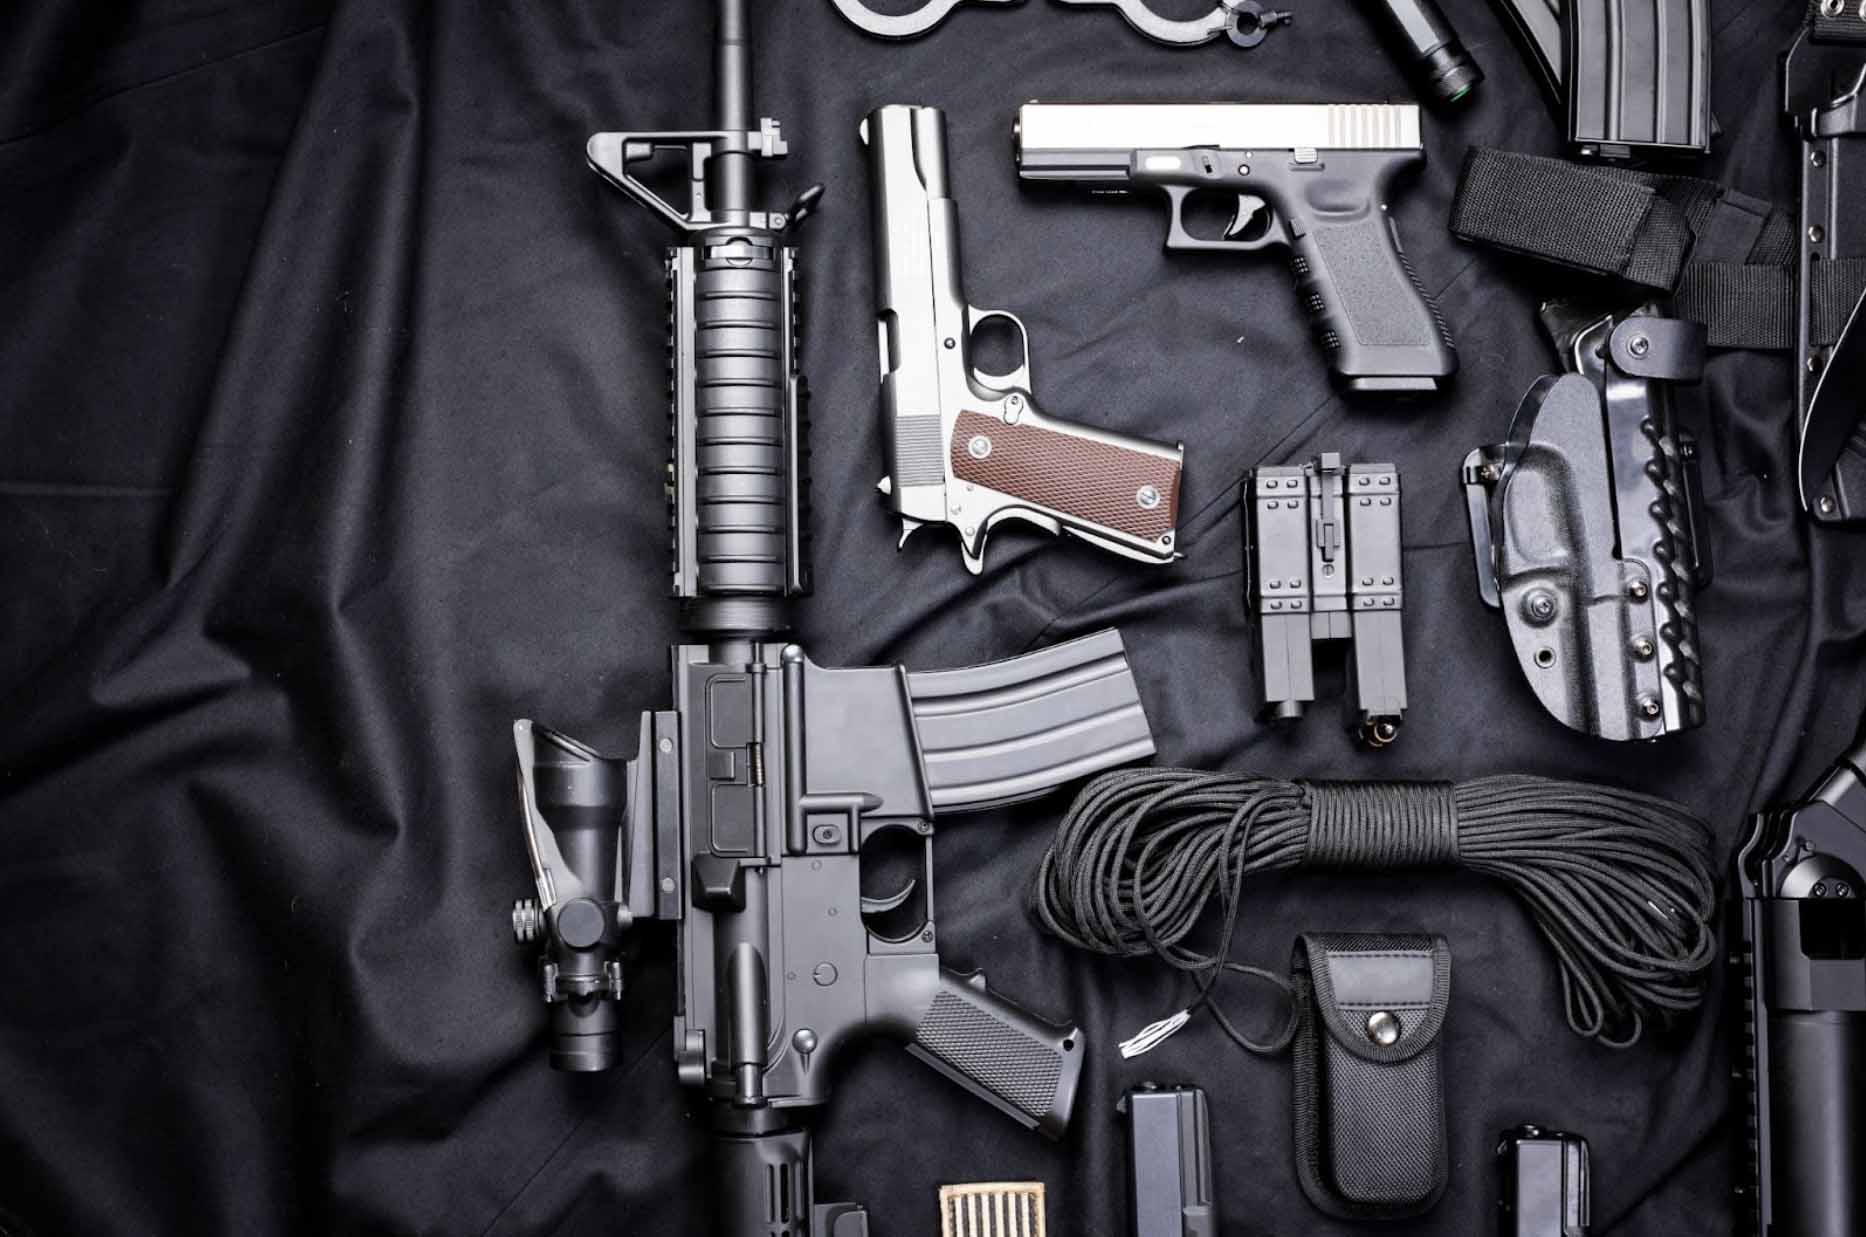 A collection of firearms and accessories displayed on a black cloth: an Armalite rifle, two types of revolvers, a handcuff, and various accessories.